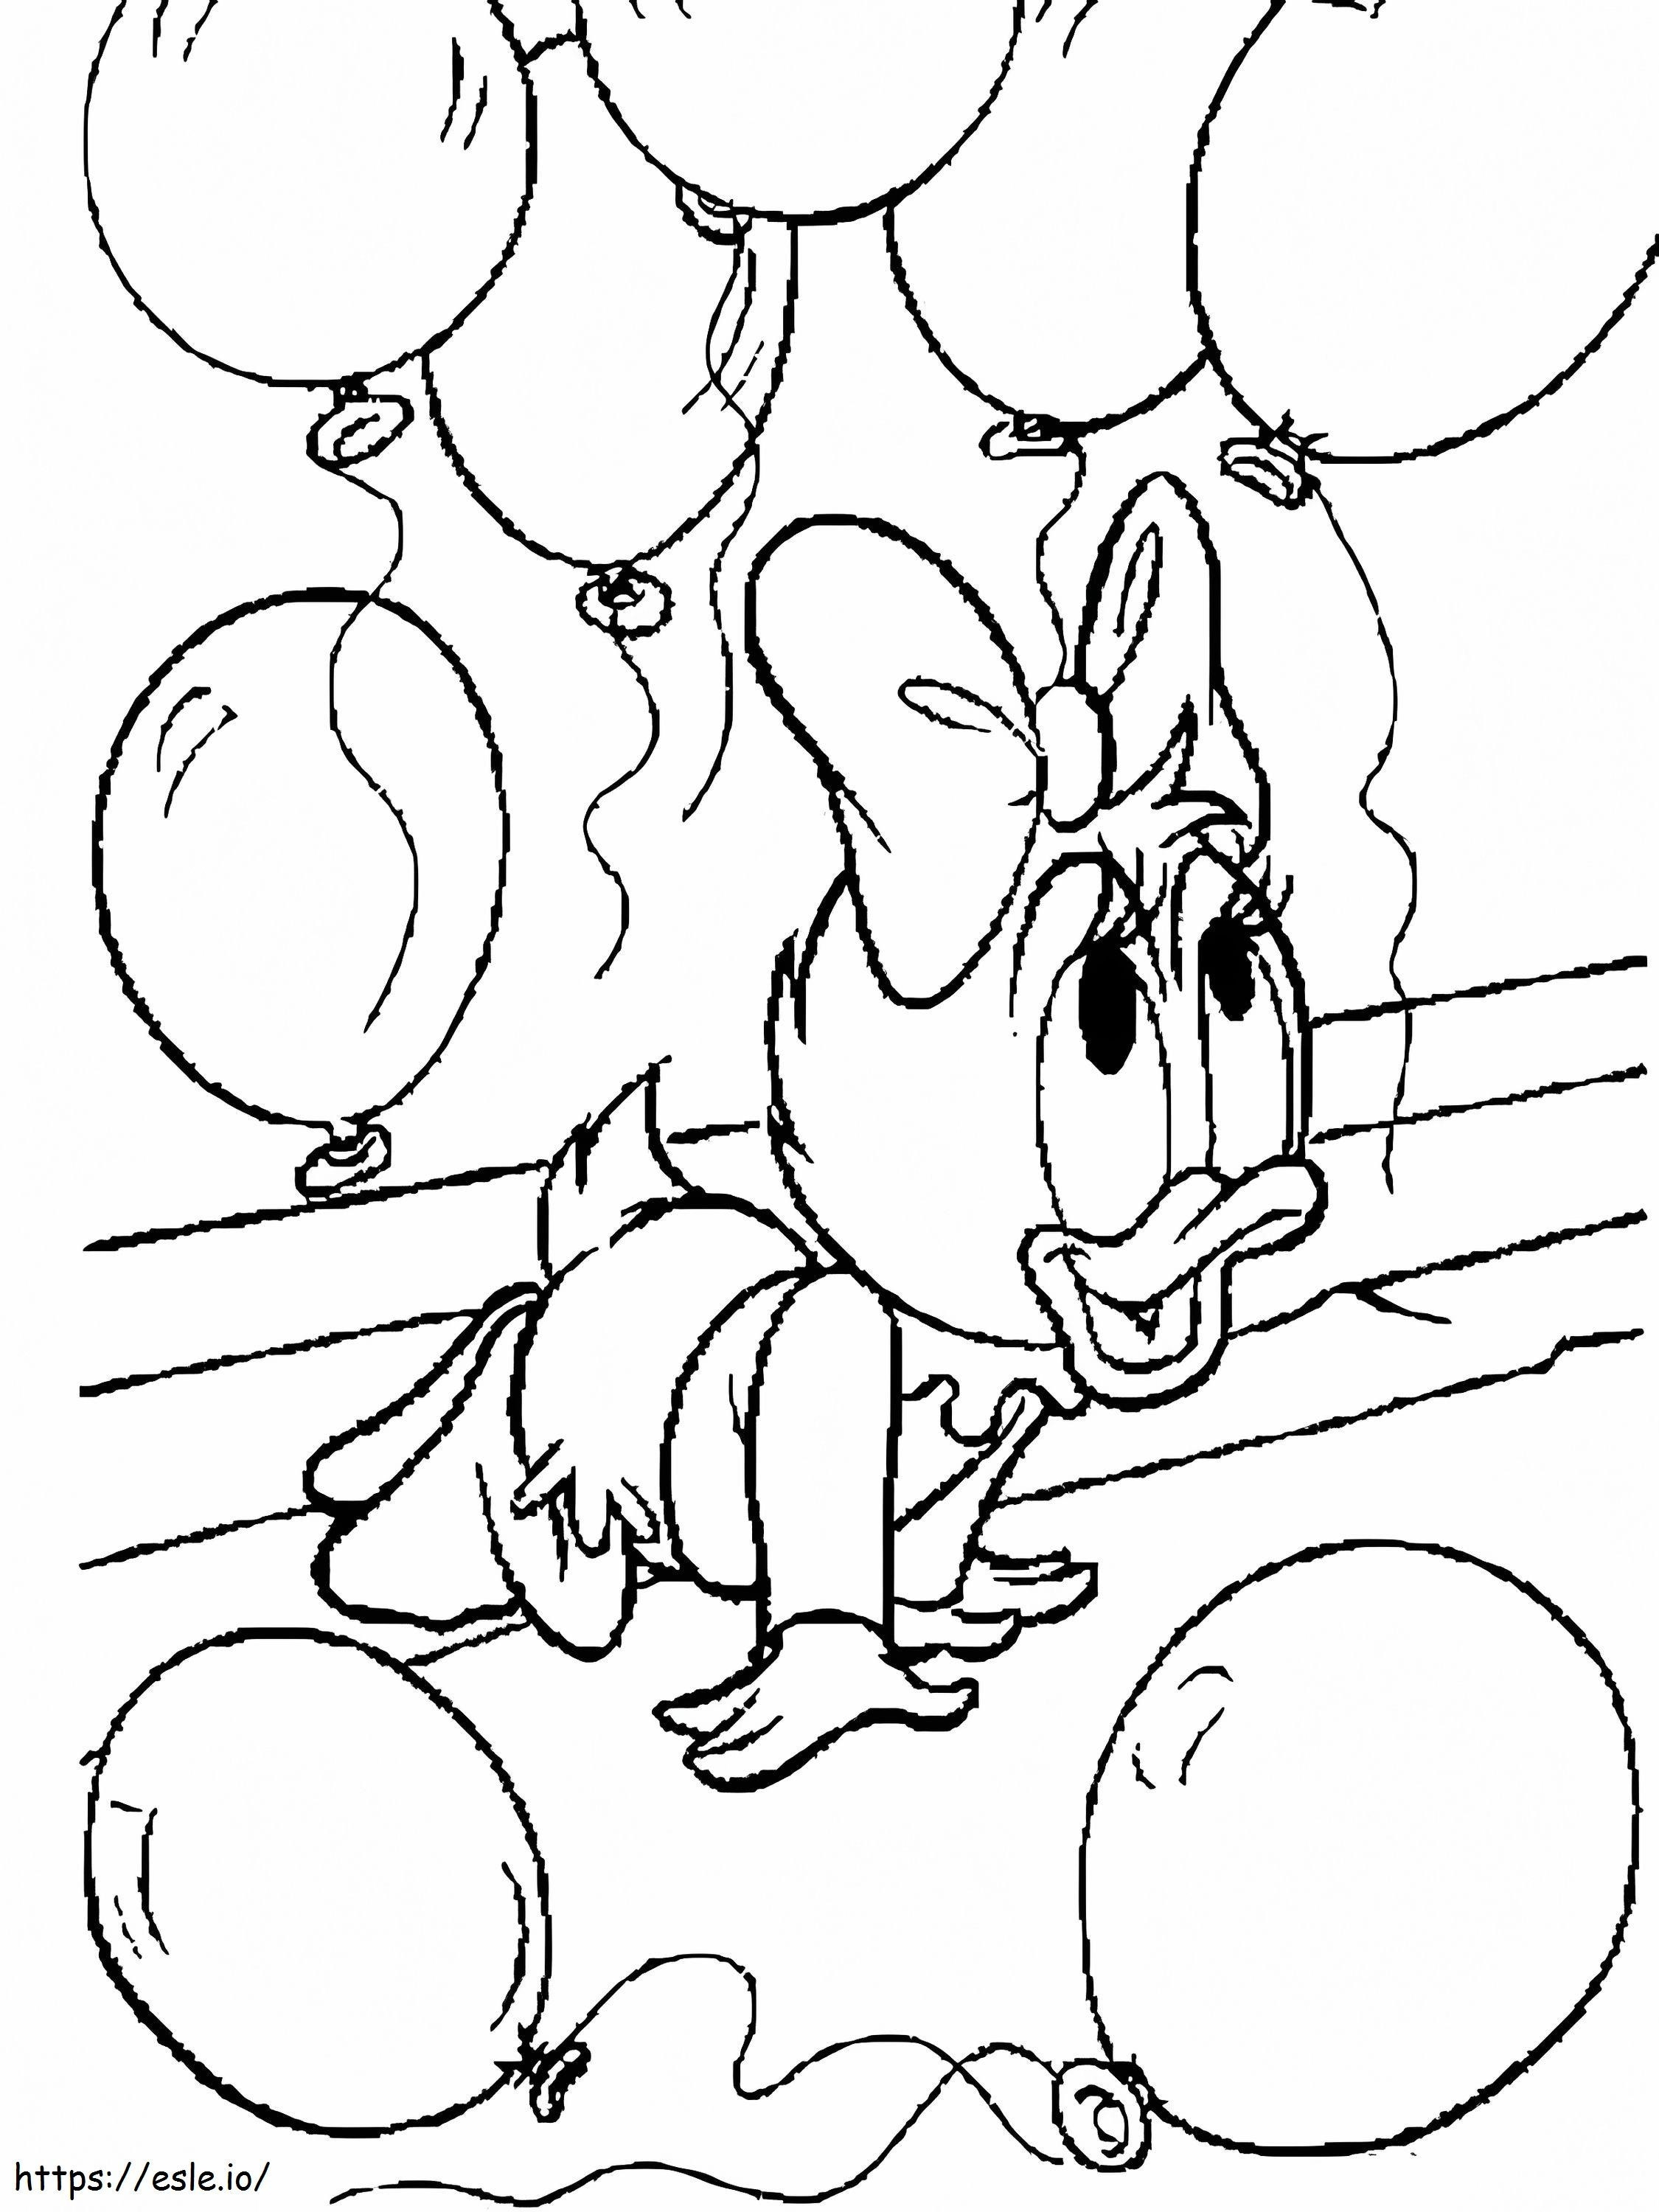 Disney Baby Daisy Duck coloring page